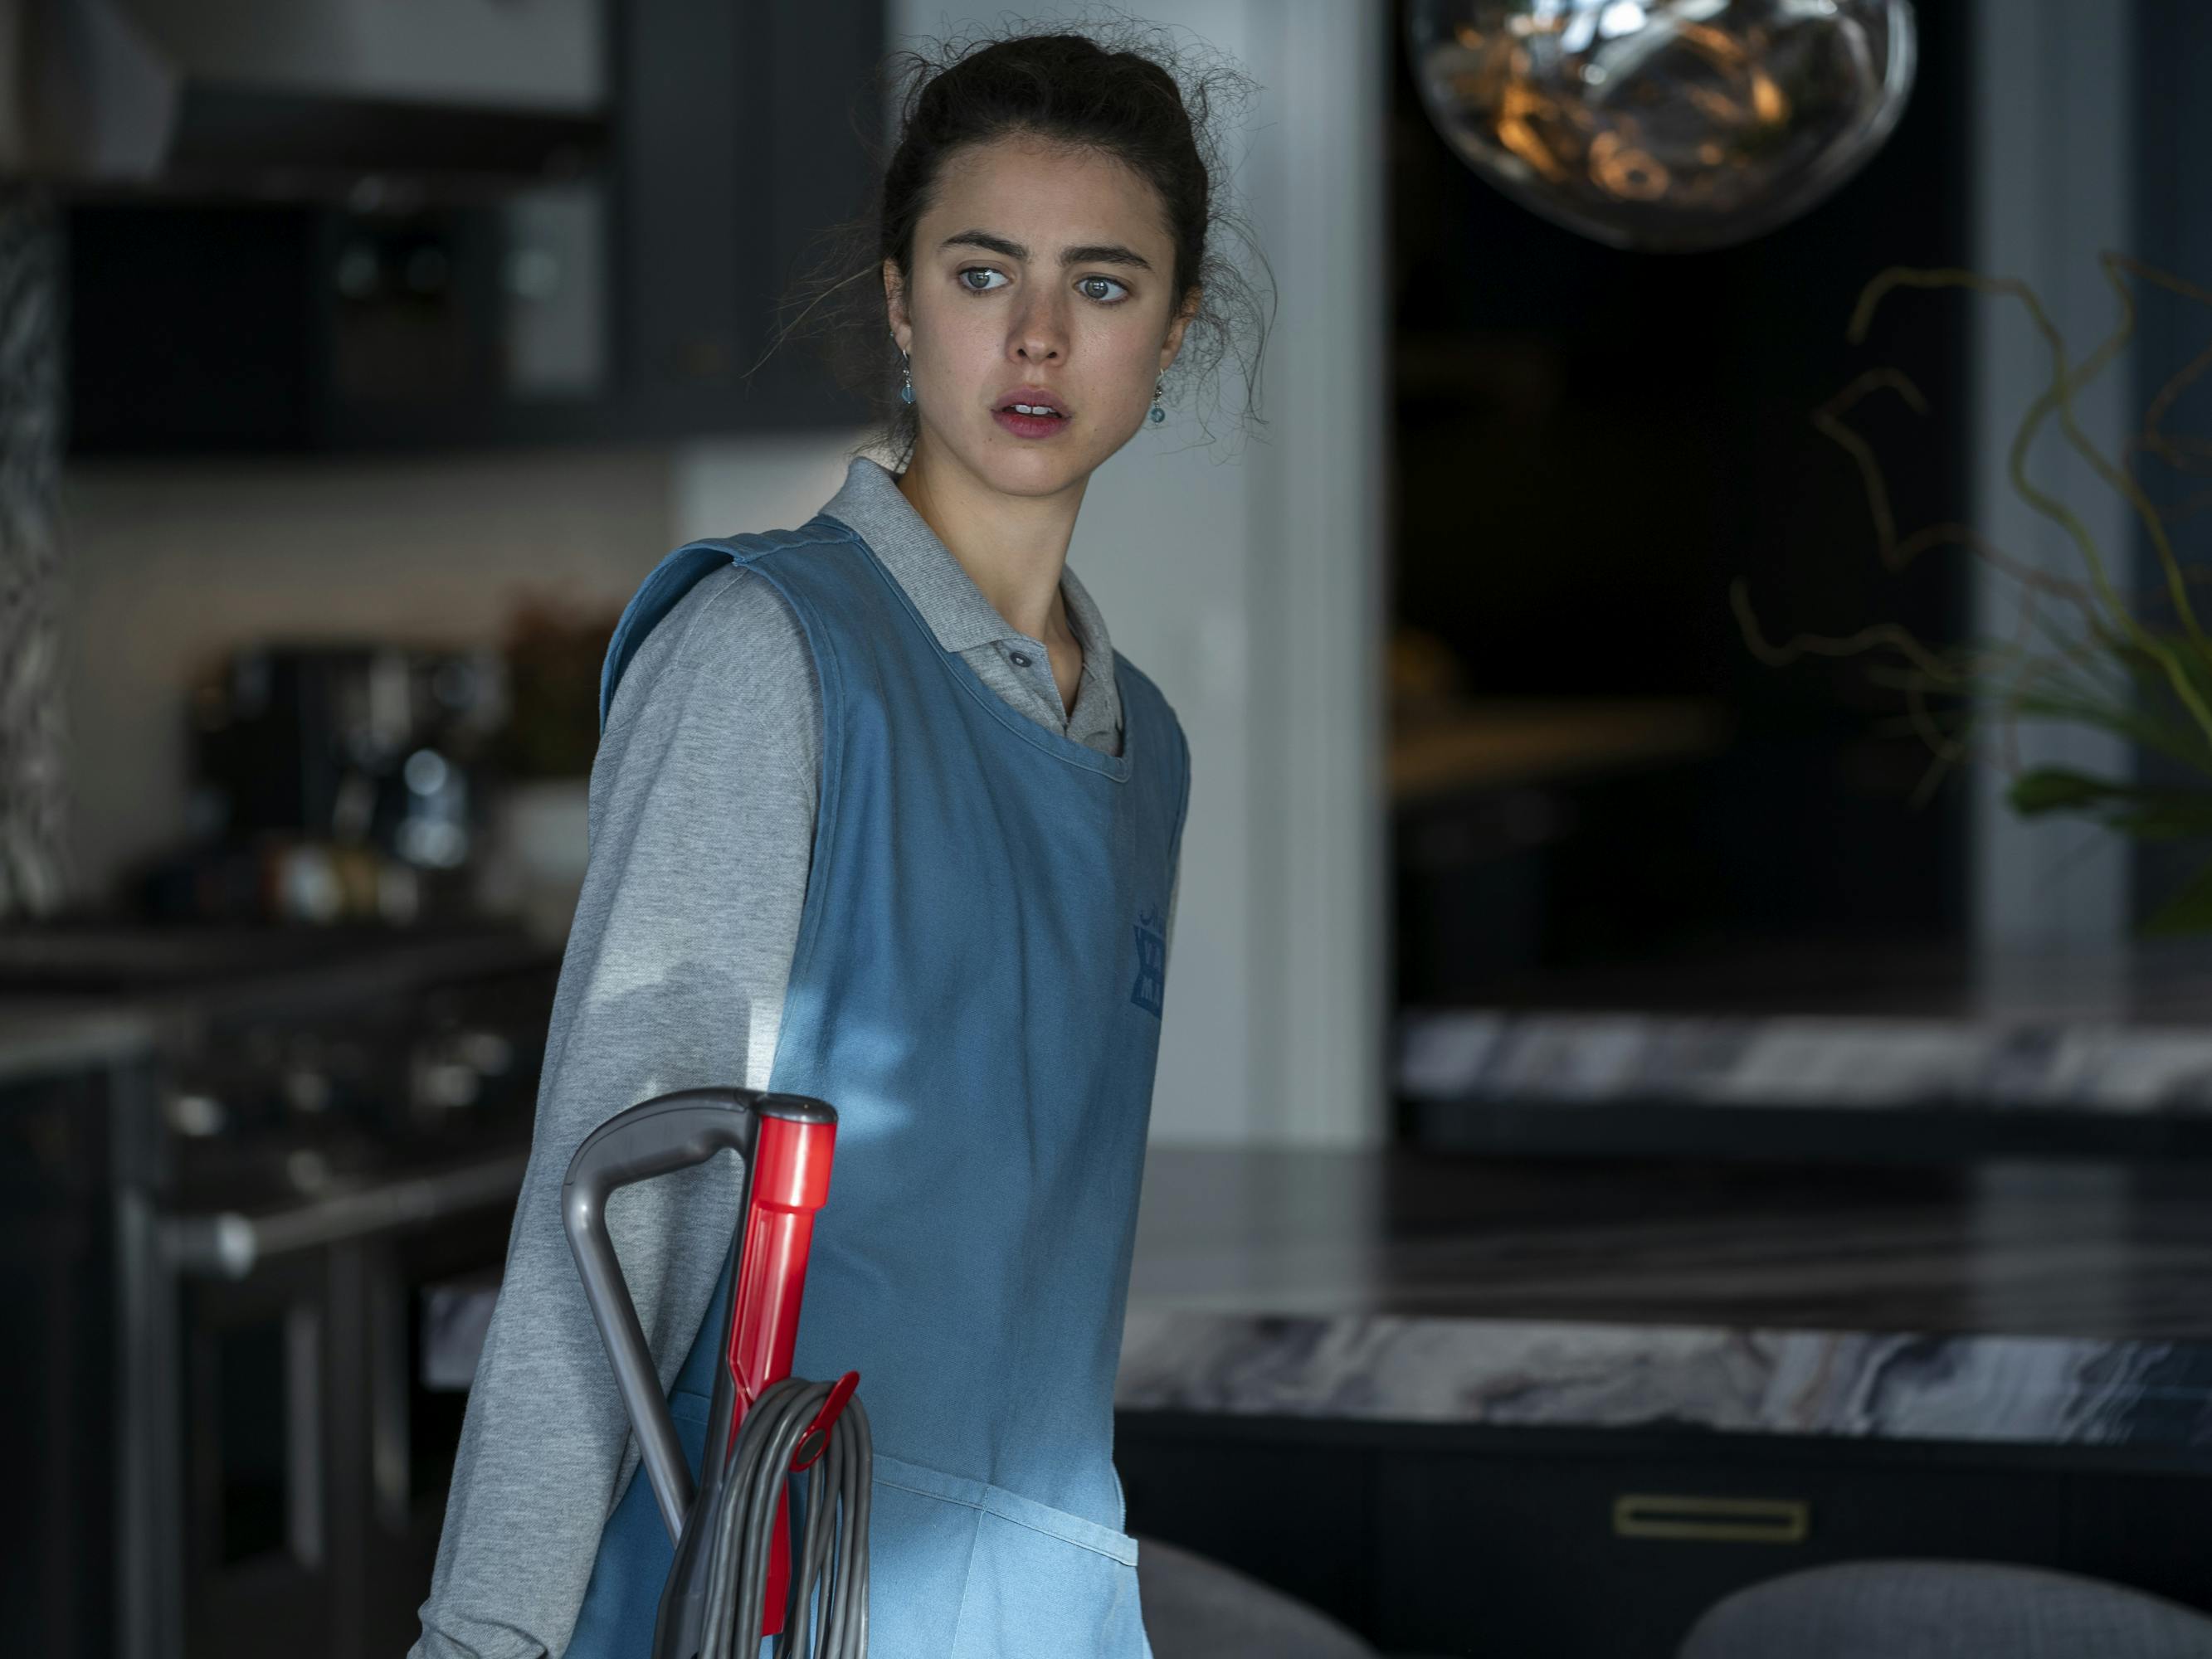 Alex Russell (Margaret Qualley) wears a maid uniform and carries a vacuum. 